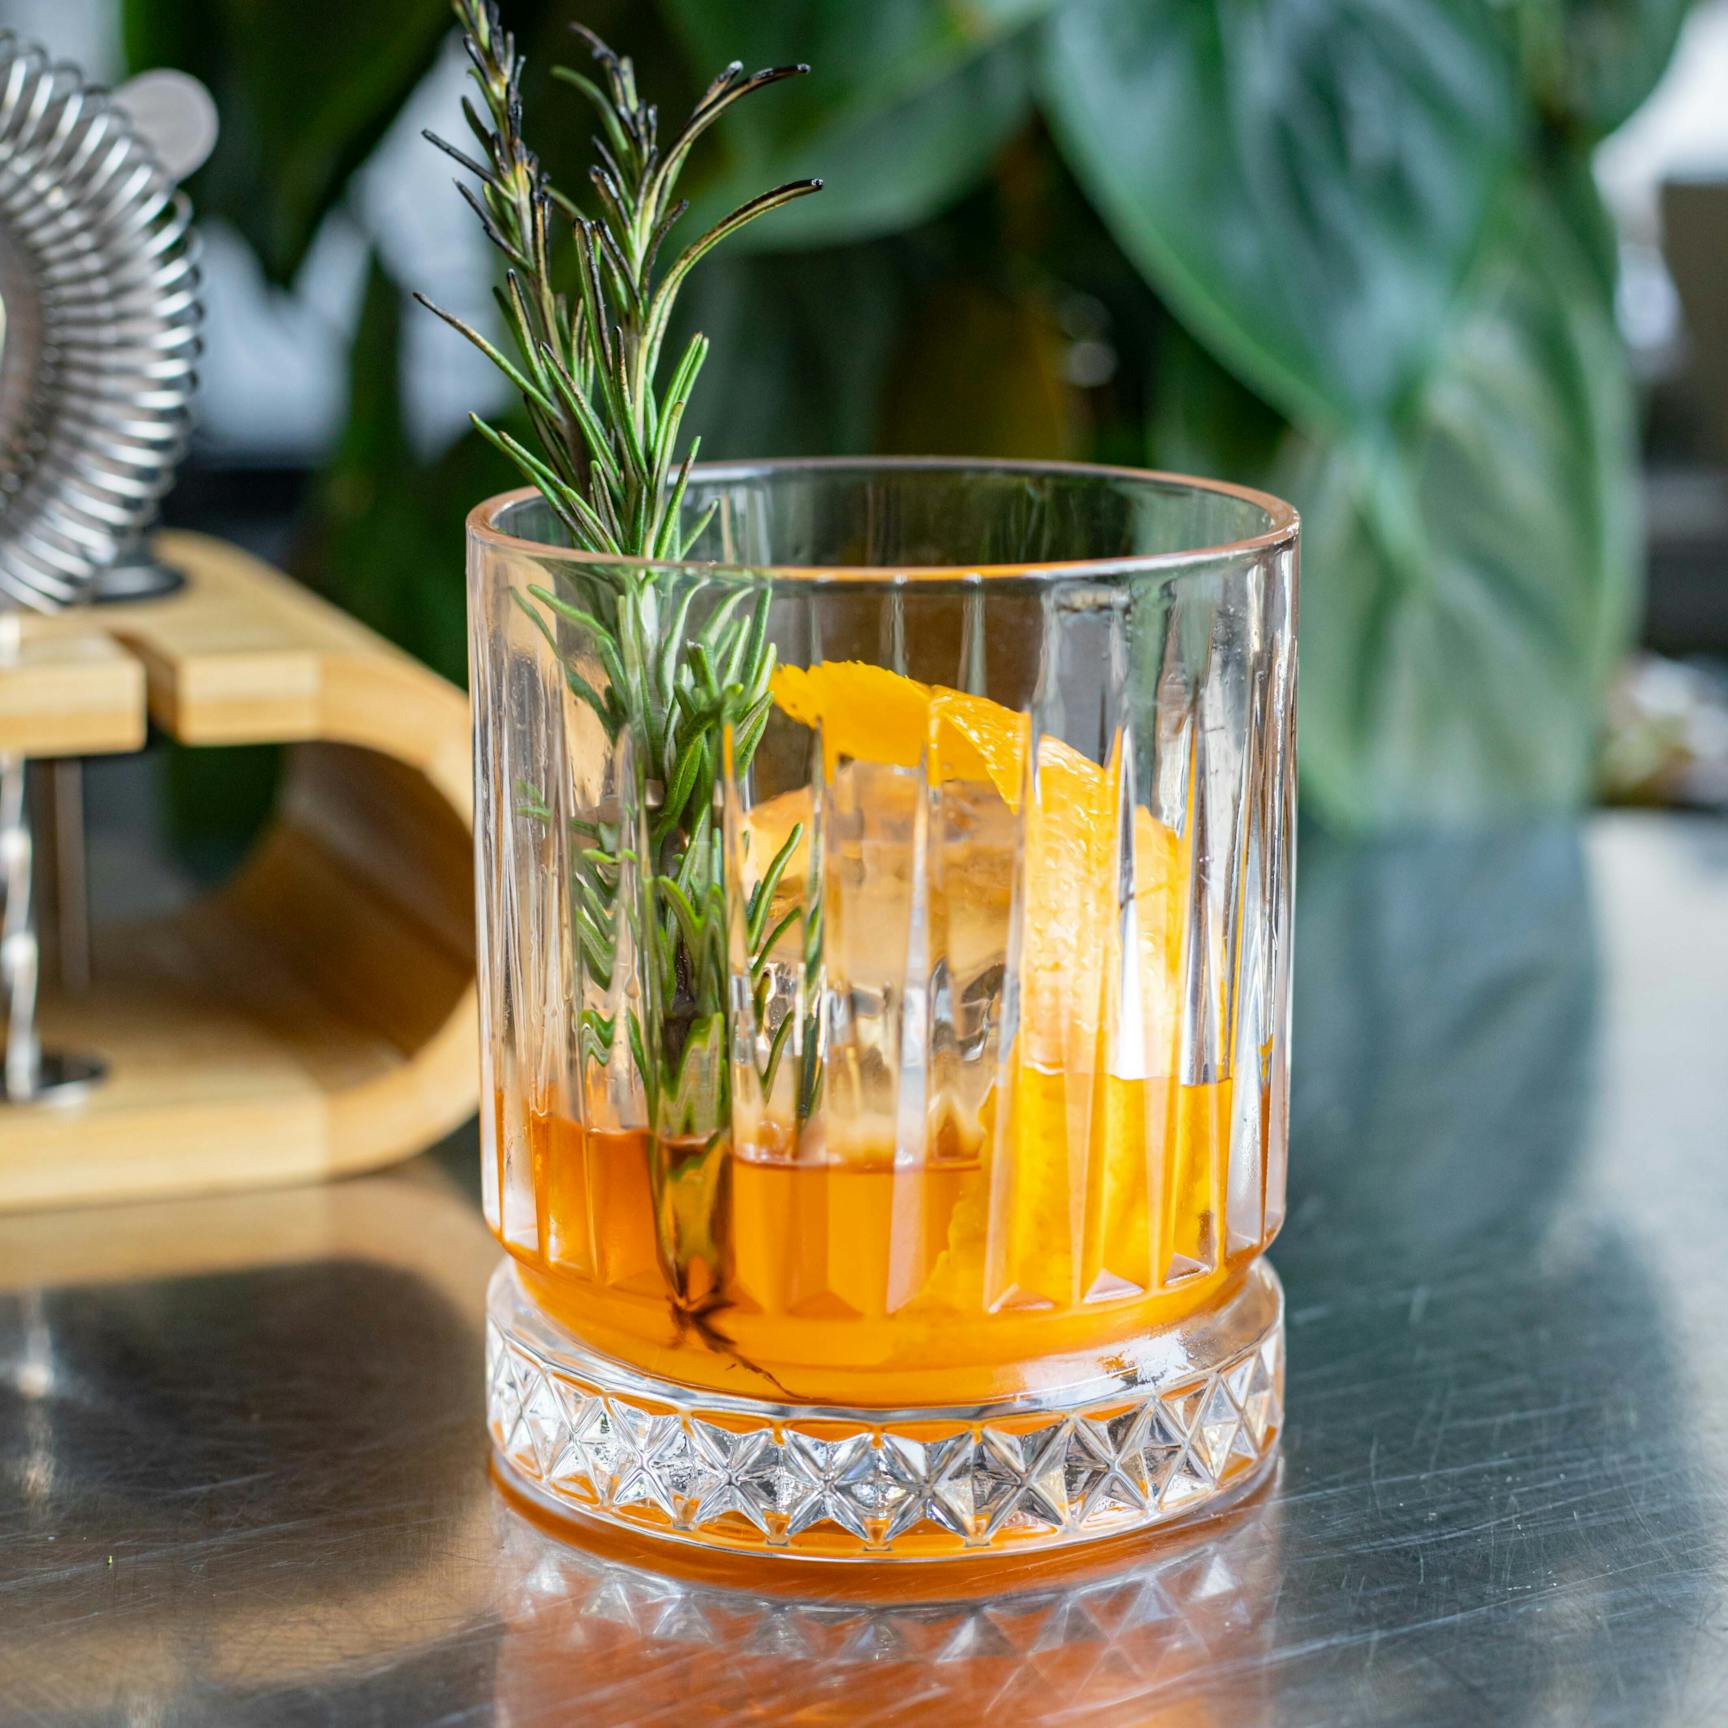 Rosemary Rum Old Fashioned